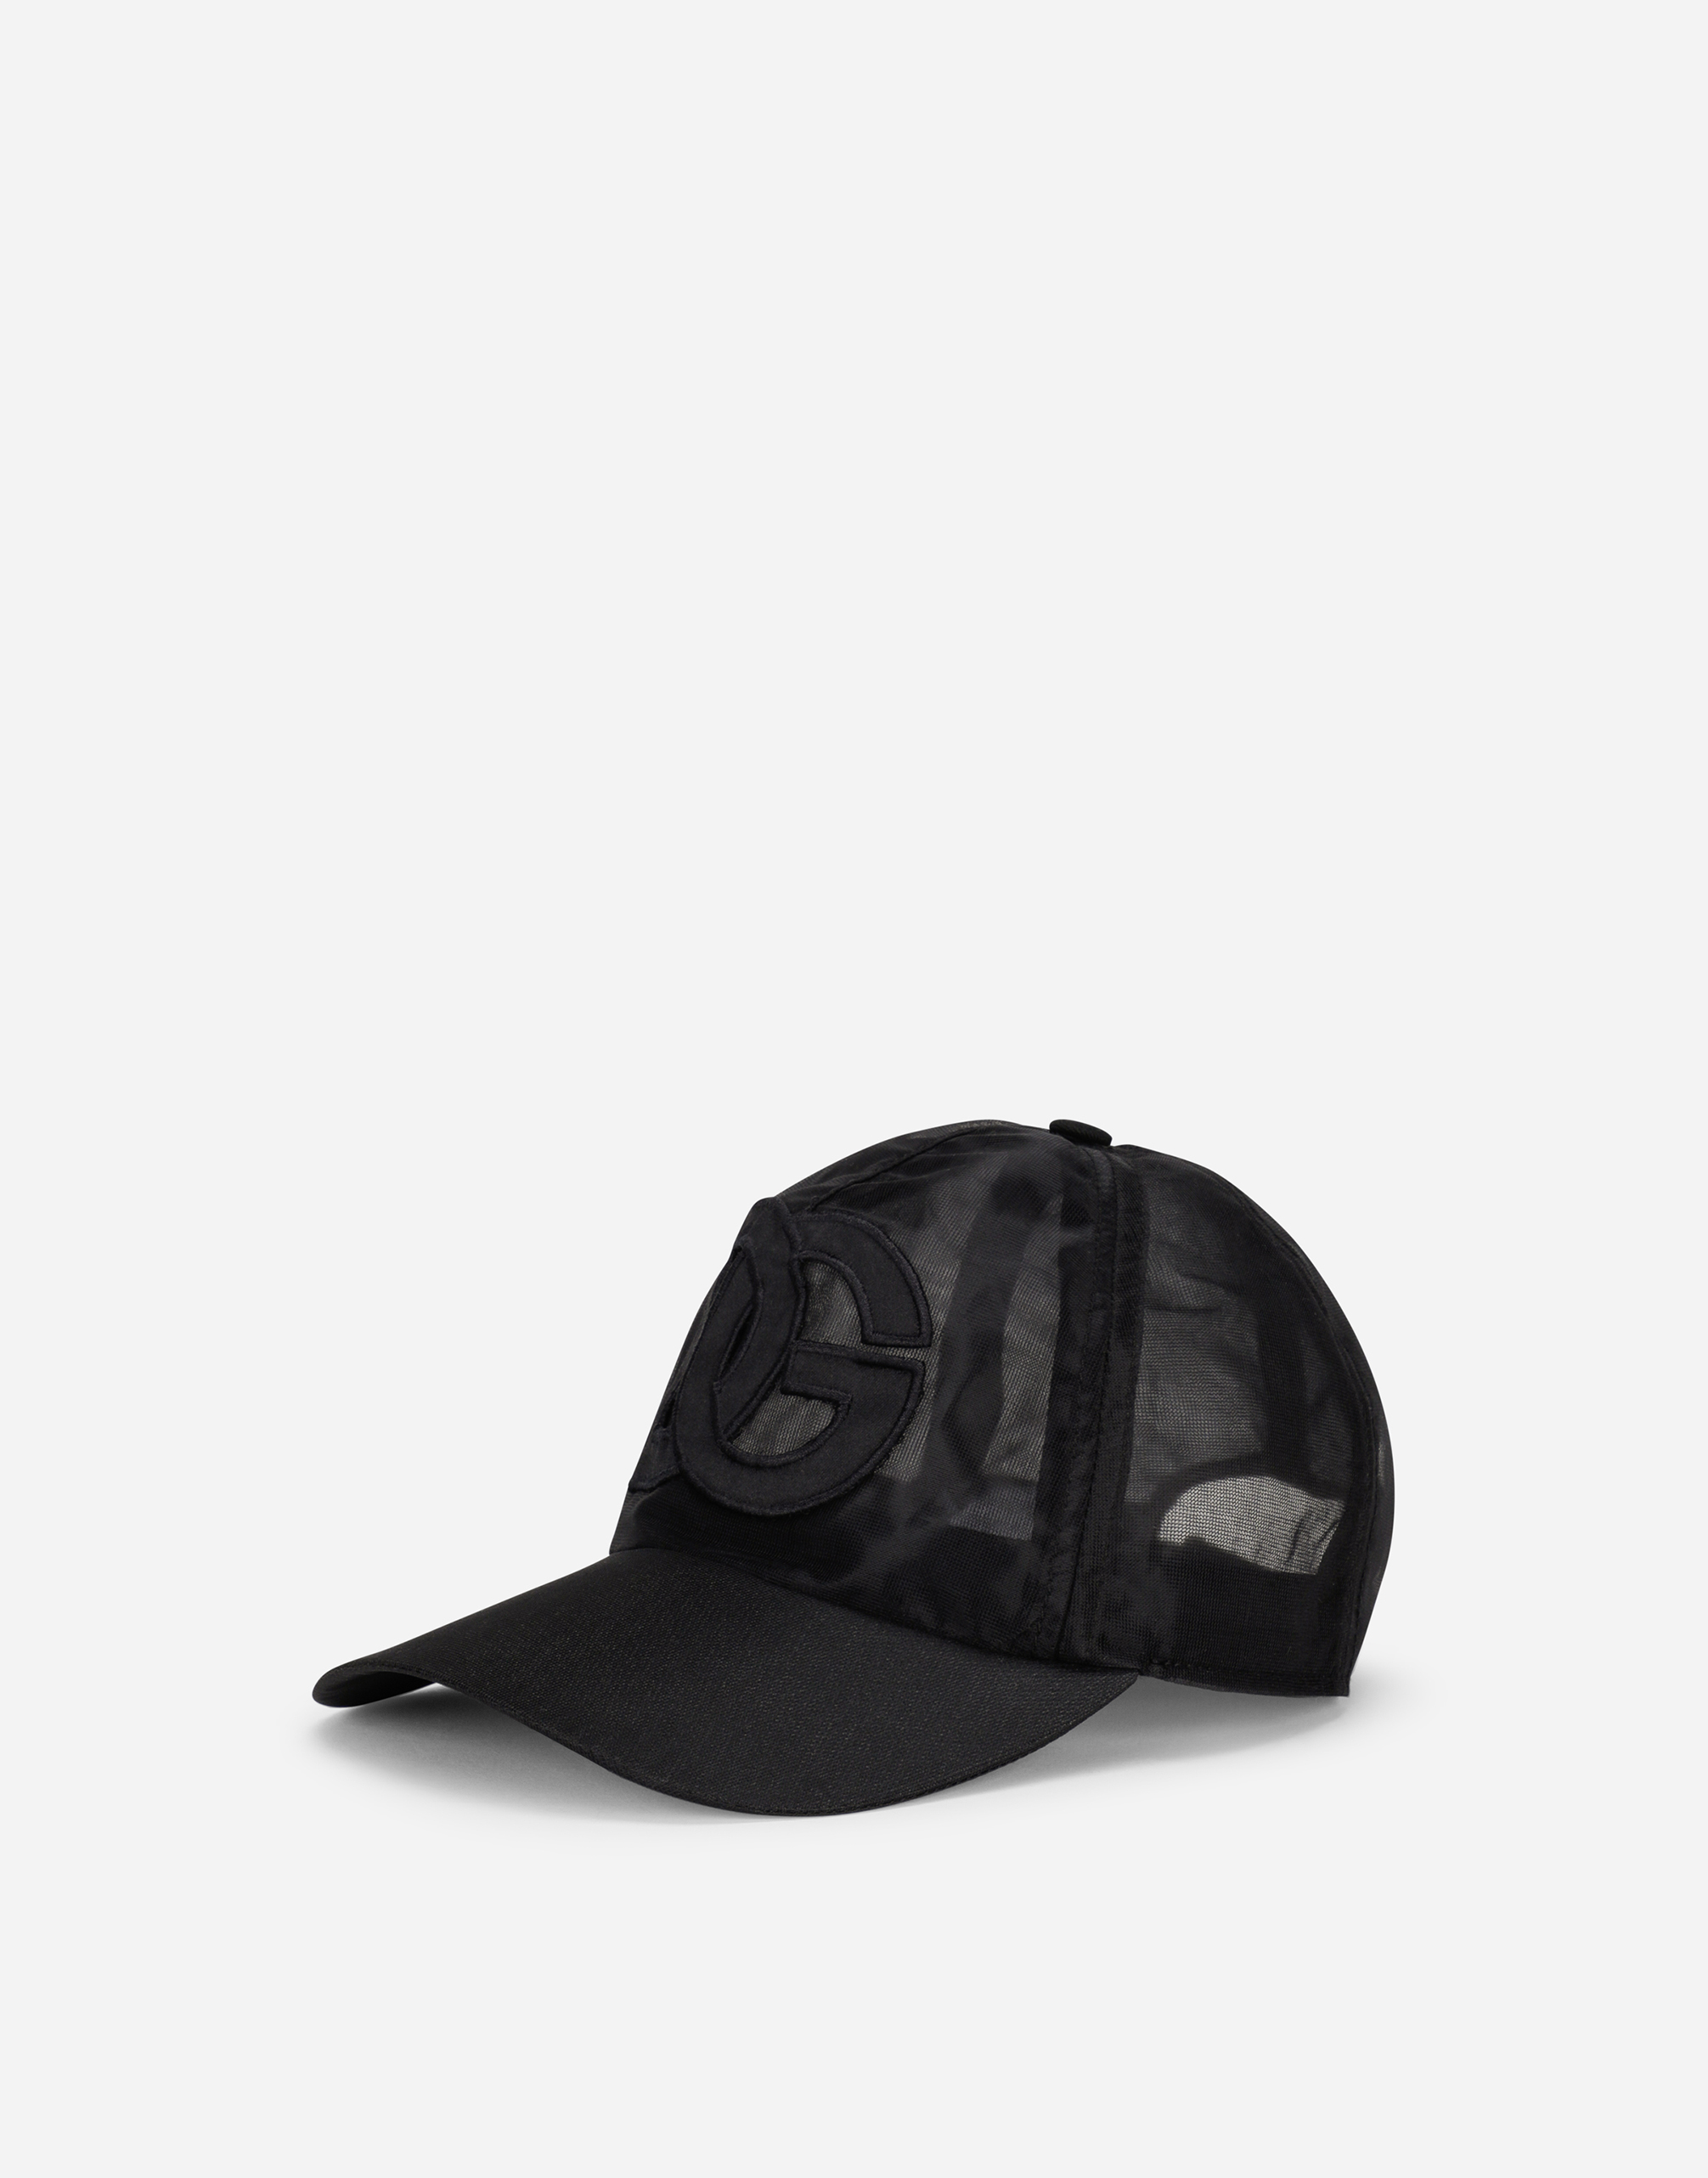 Marquisette hat with DG logo in Black